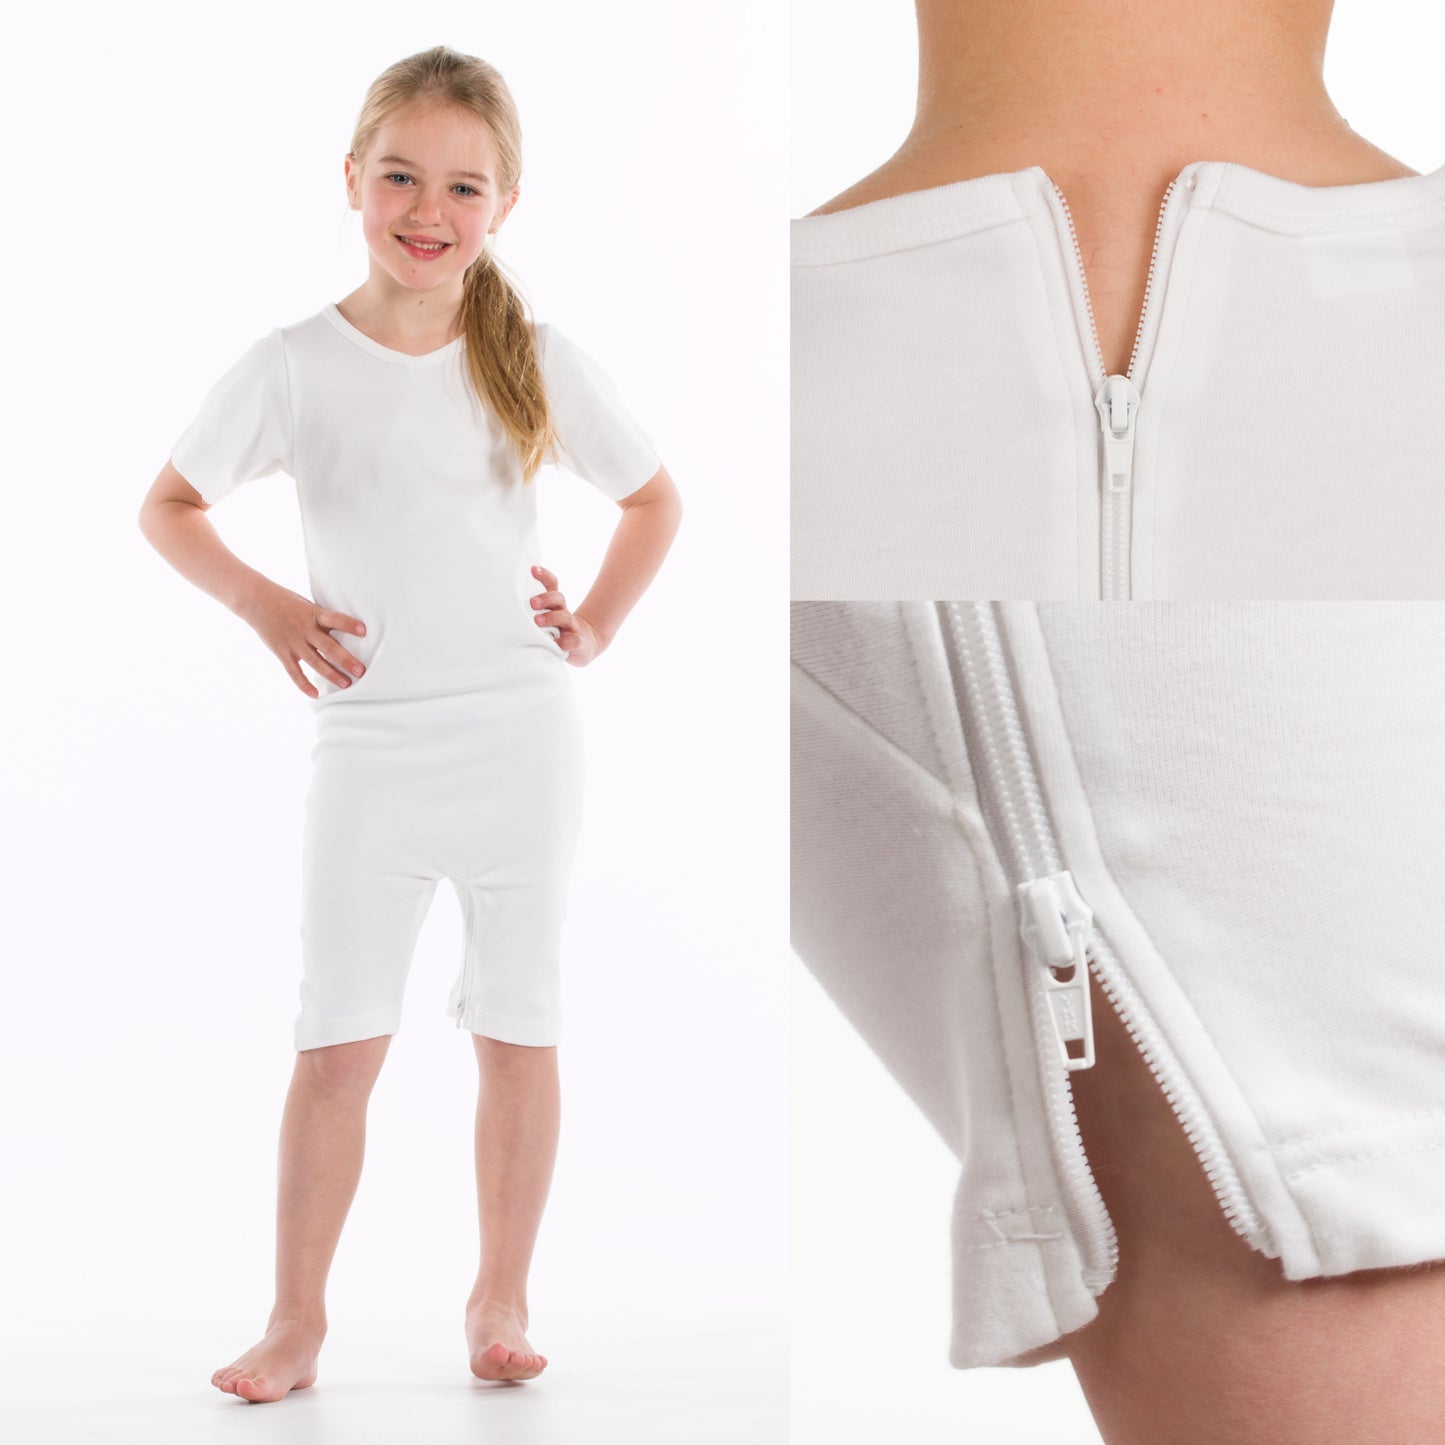 Children's Bodysuit - Short Sleeves and Legs/Back and Crotch Zip  (4020)